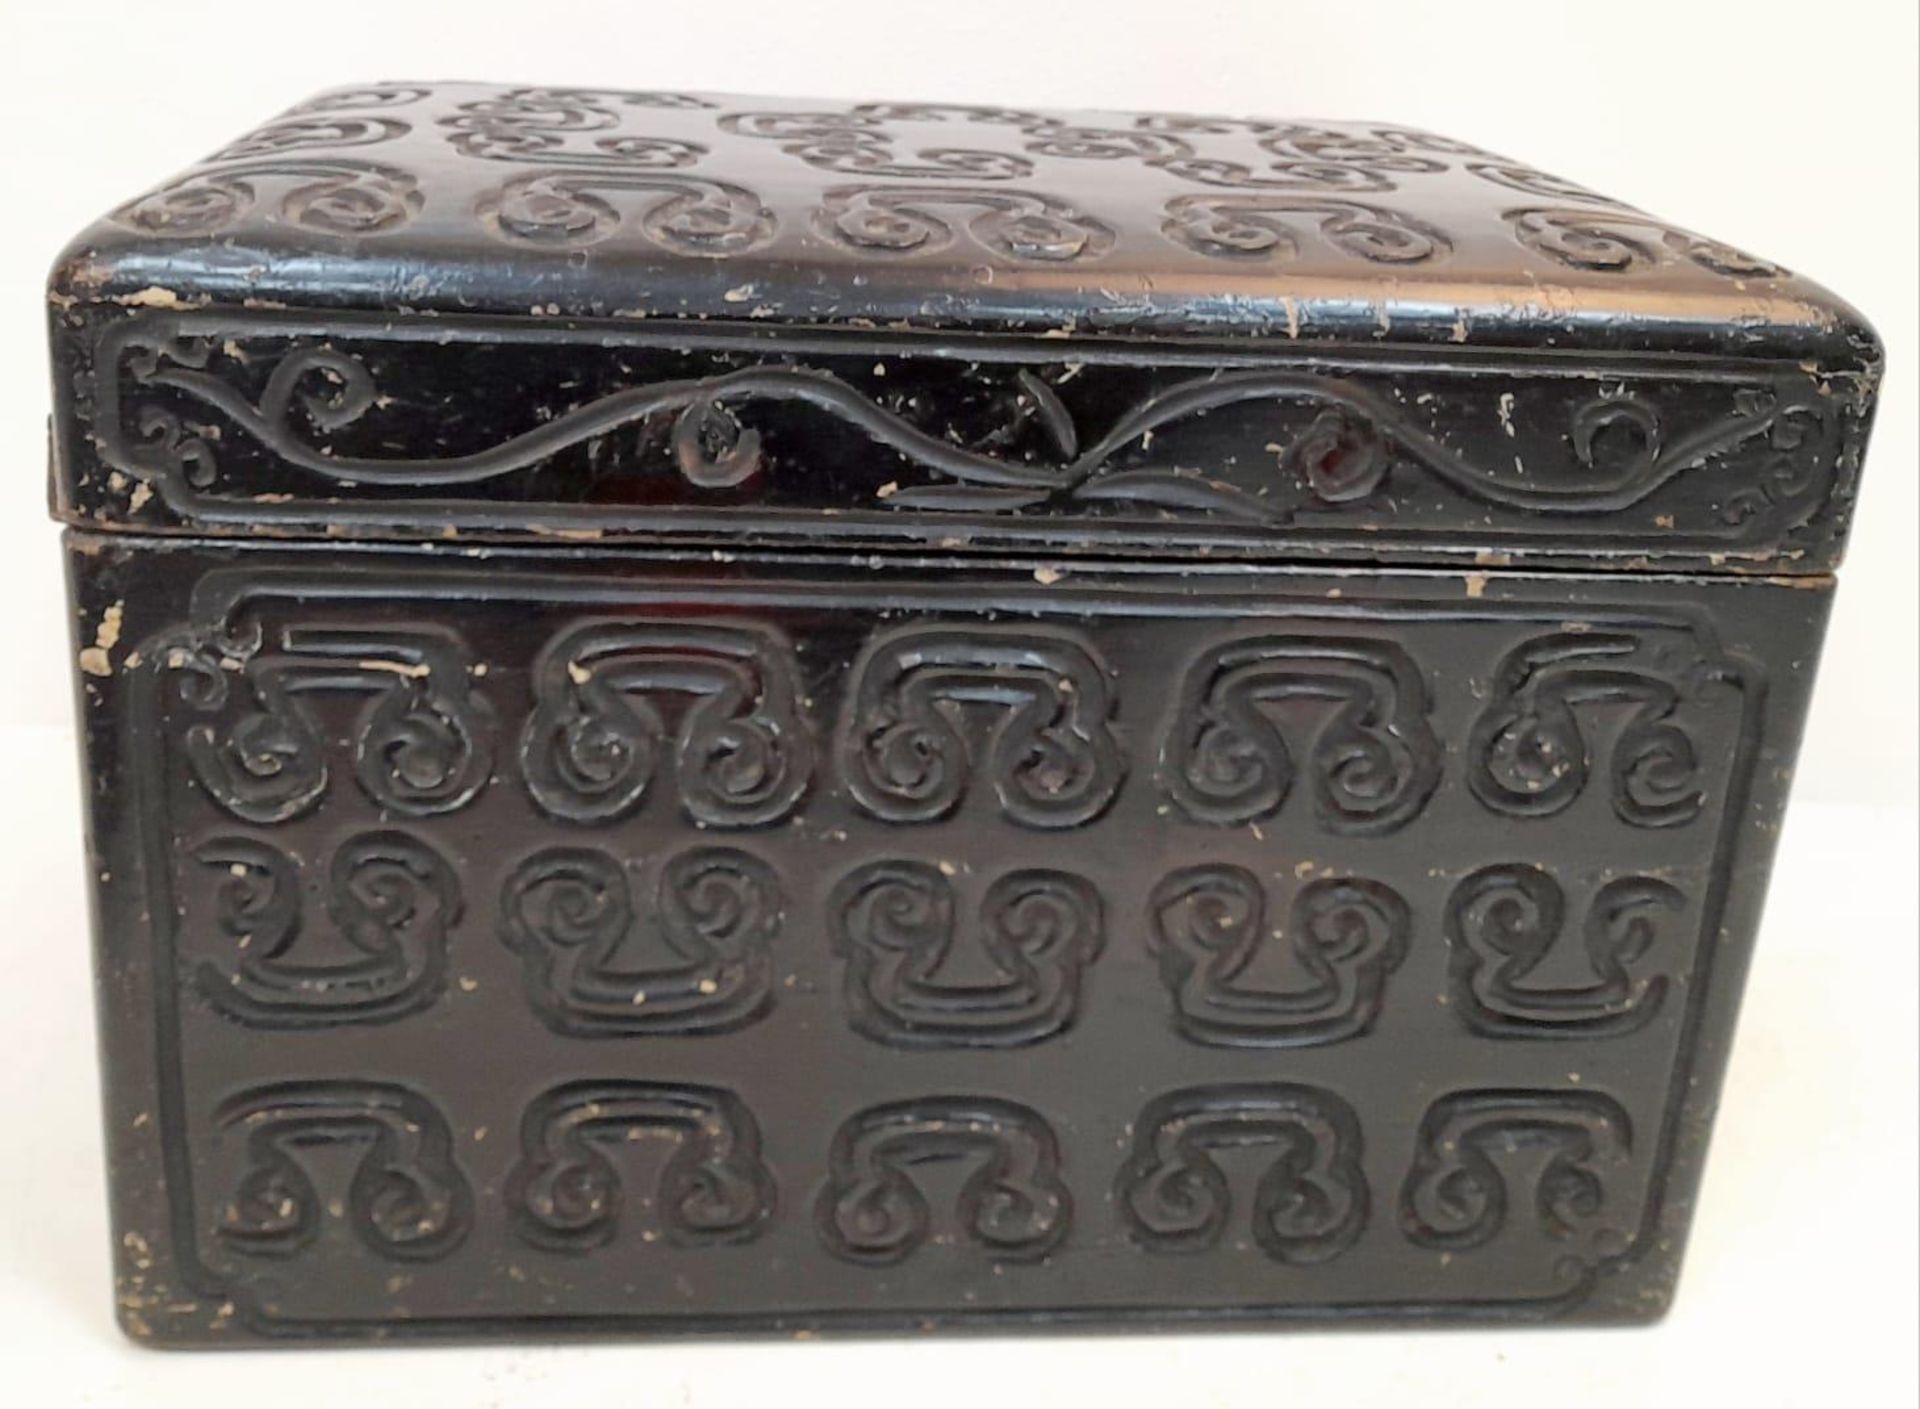 A Fascinating and Wonderful Antique Chinese Large Lacquered Box - 18th century, possibly earlier. - Image 7 of 7